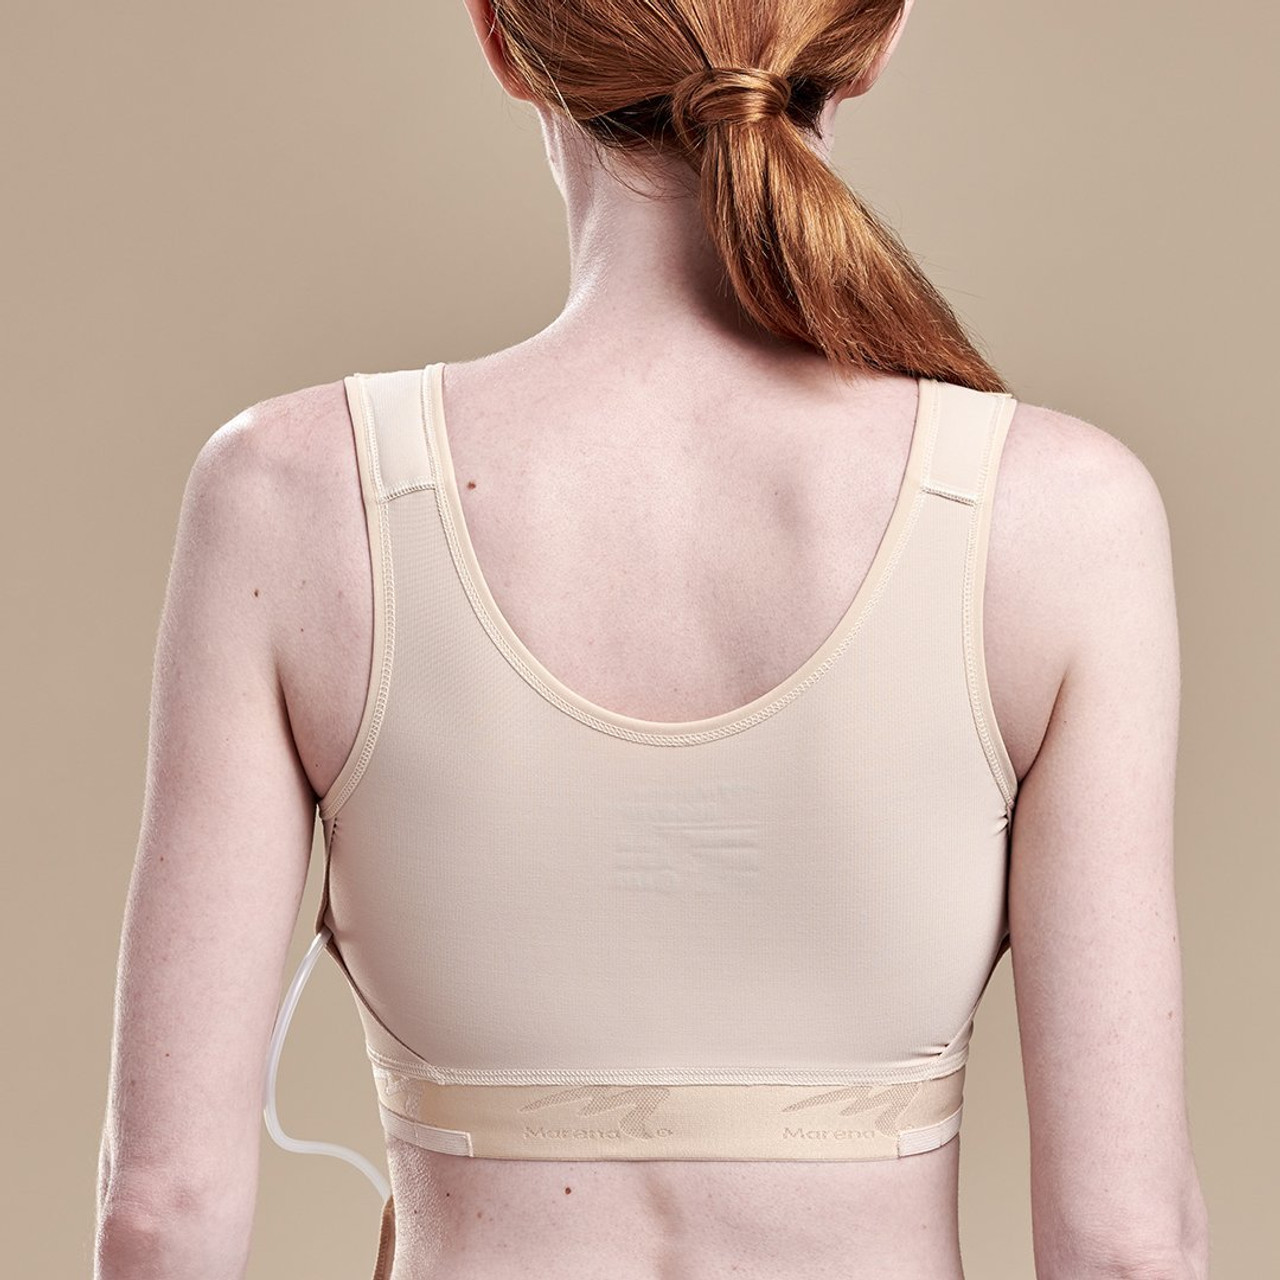 Marena Post Surgical Compression Bra with 2 elastic band